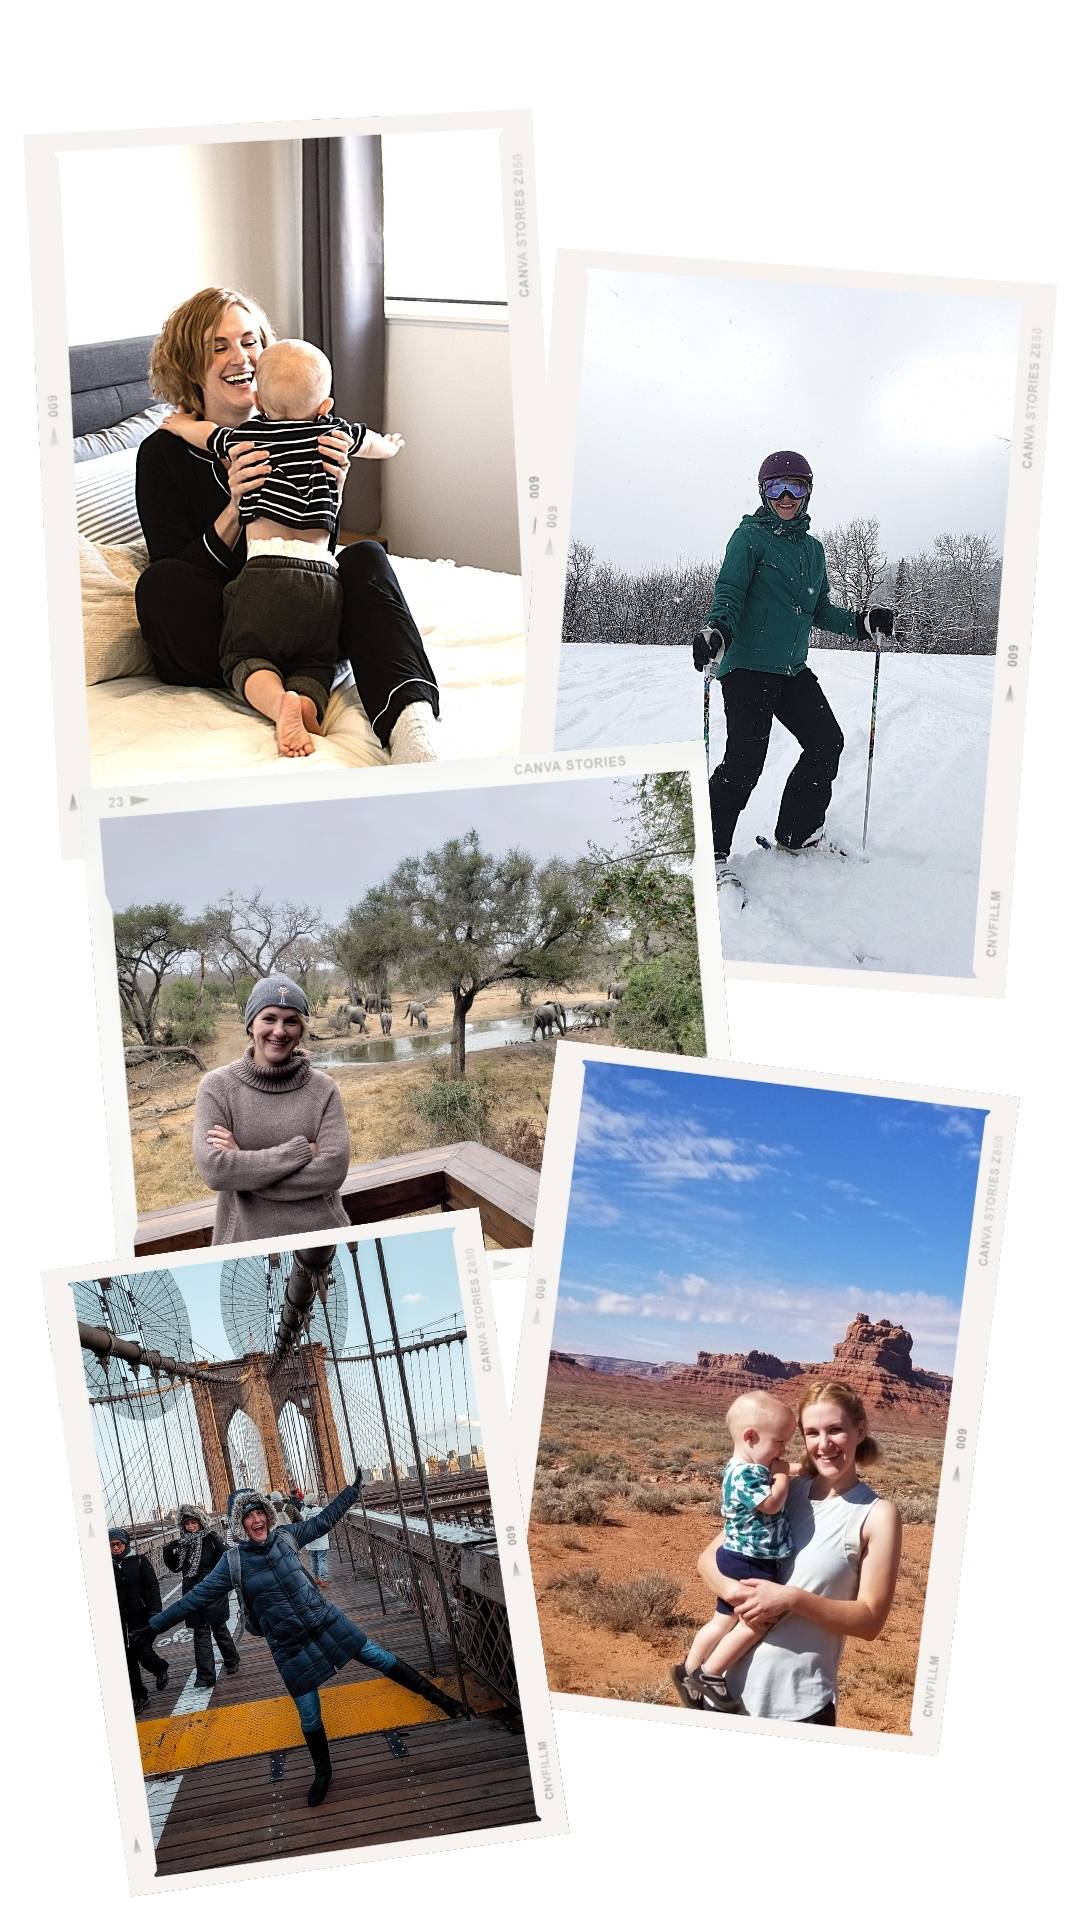 Erin doing all the fun things her business lets her--ski, spend time with her toddler, and travel